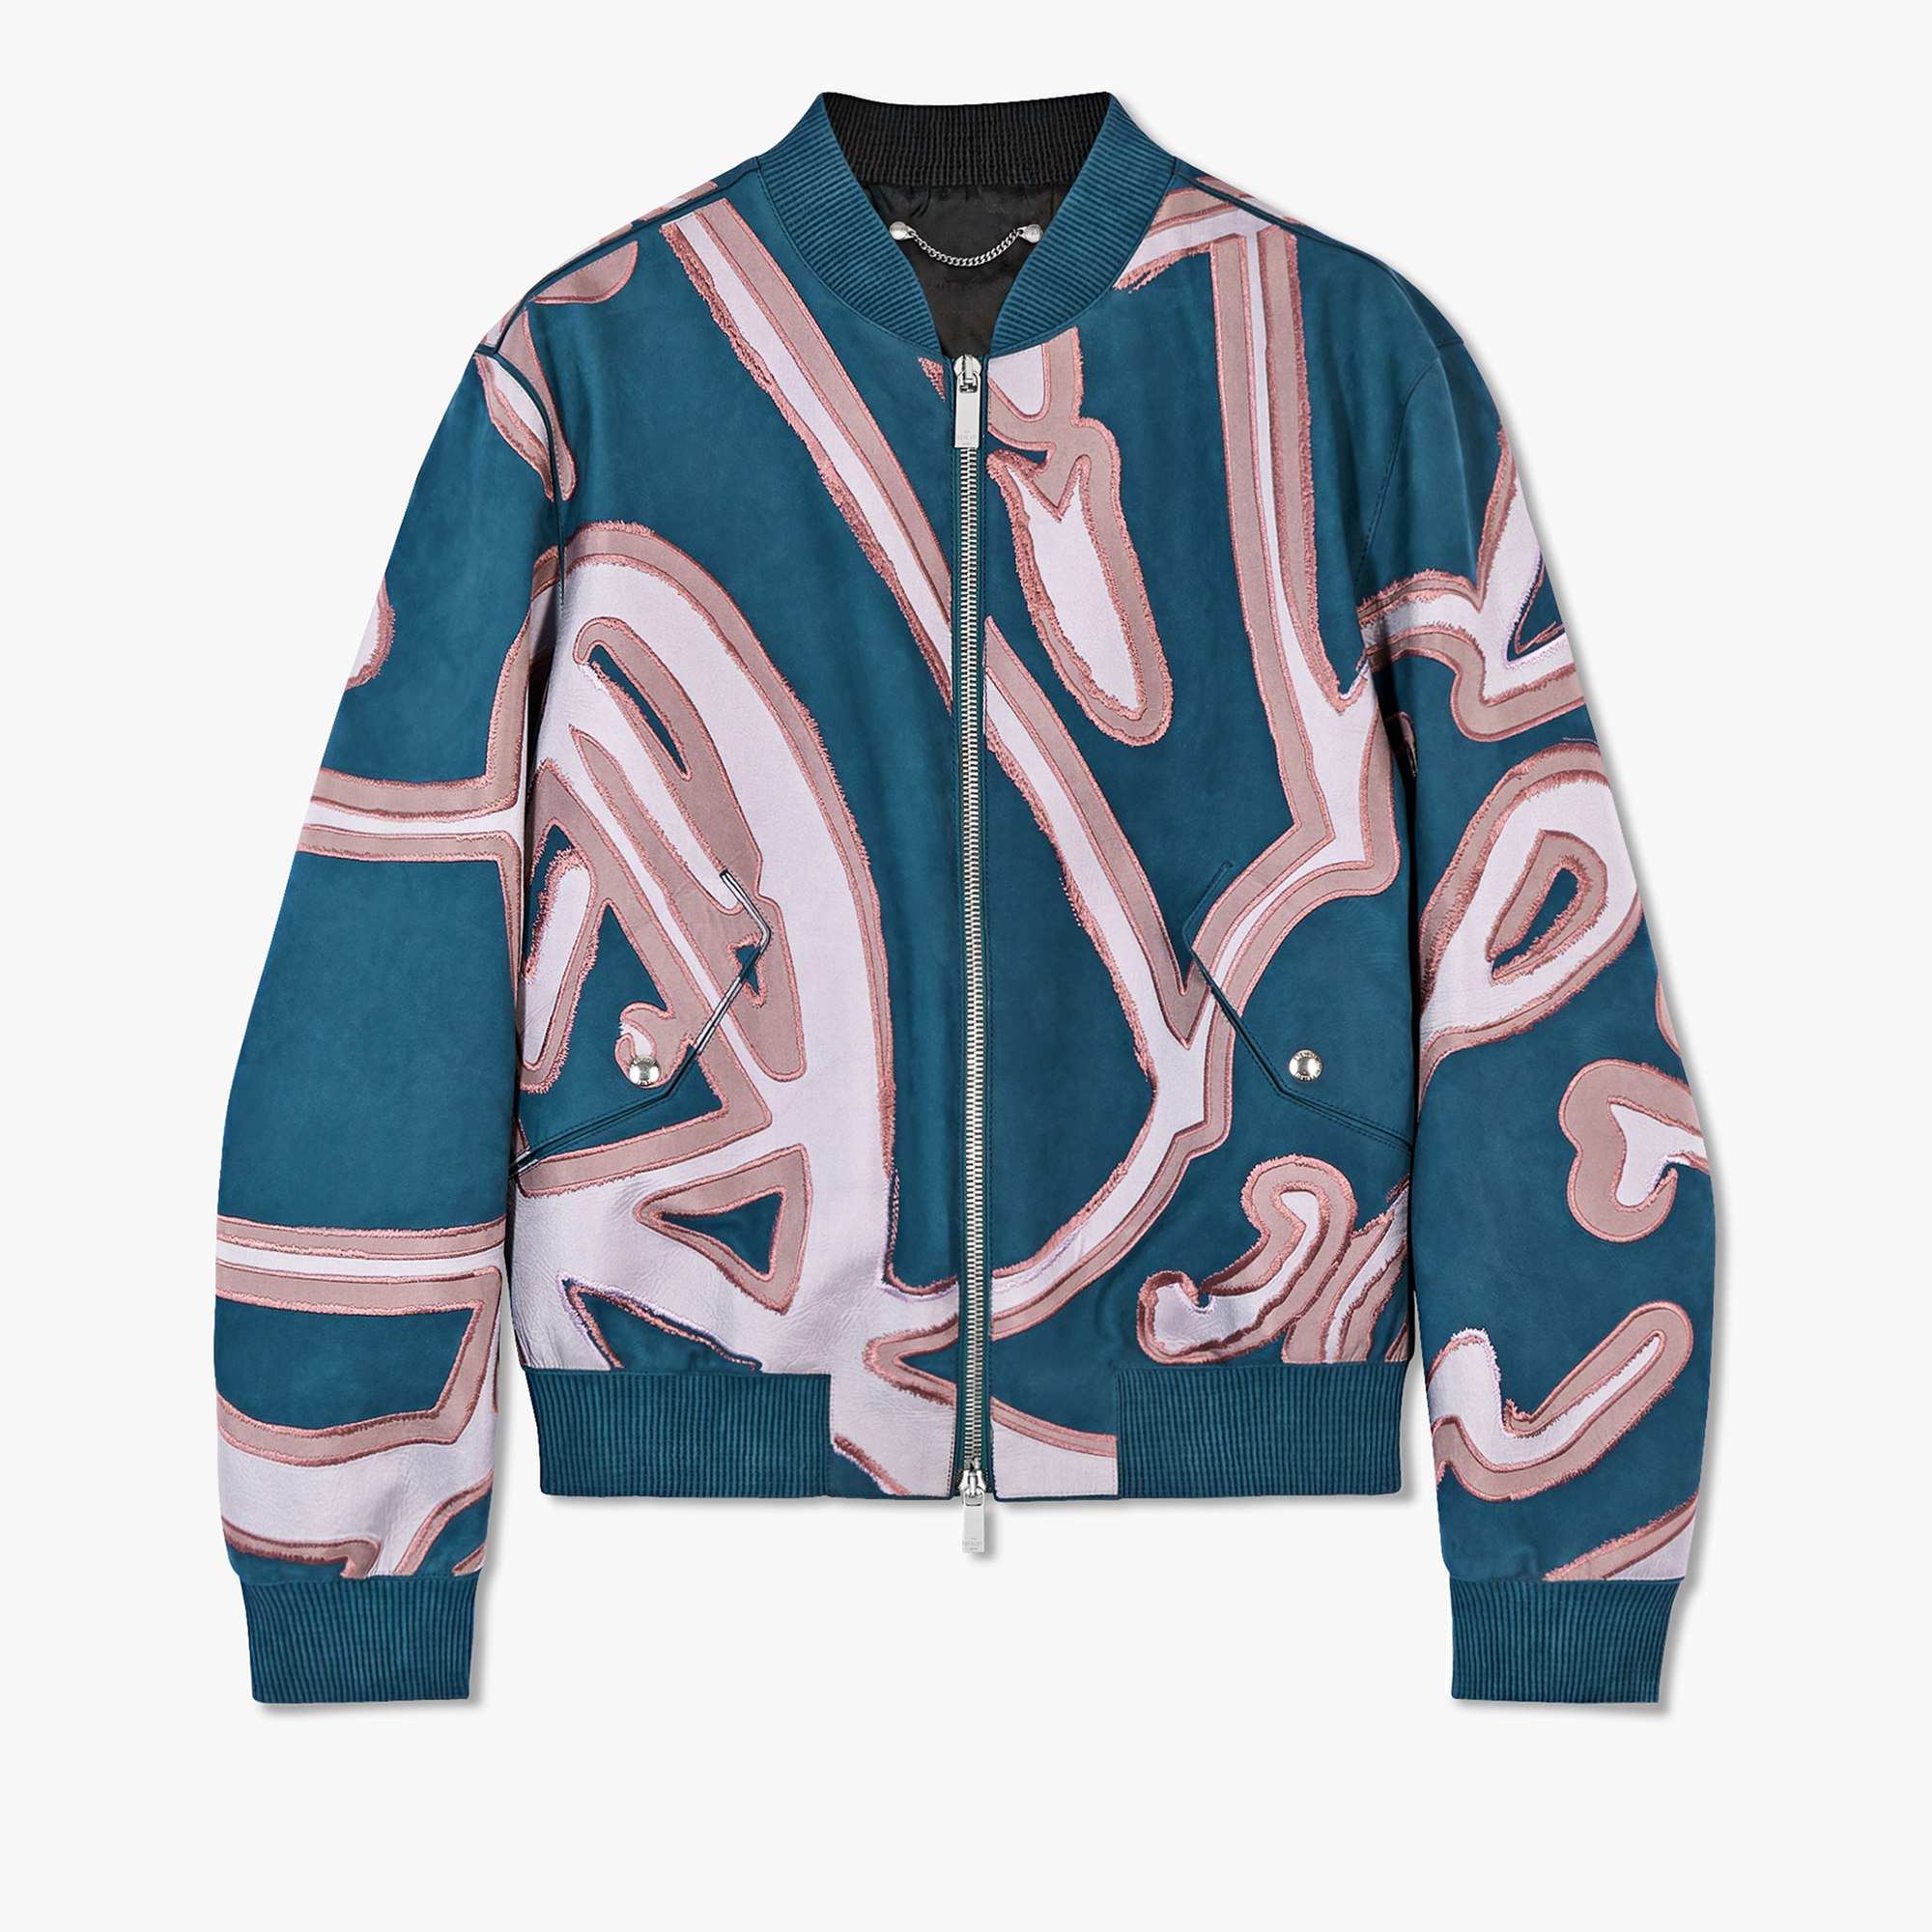 Nubuck Leather Bomber With Embroidered Silk Giant Scritto, BLUE EMERALD, hi-res